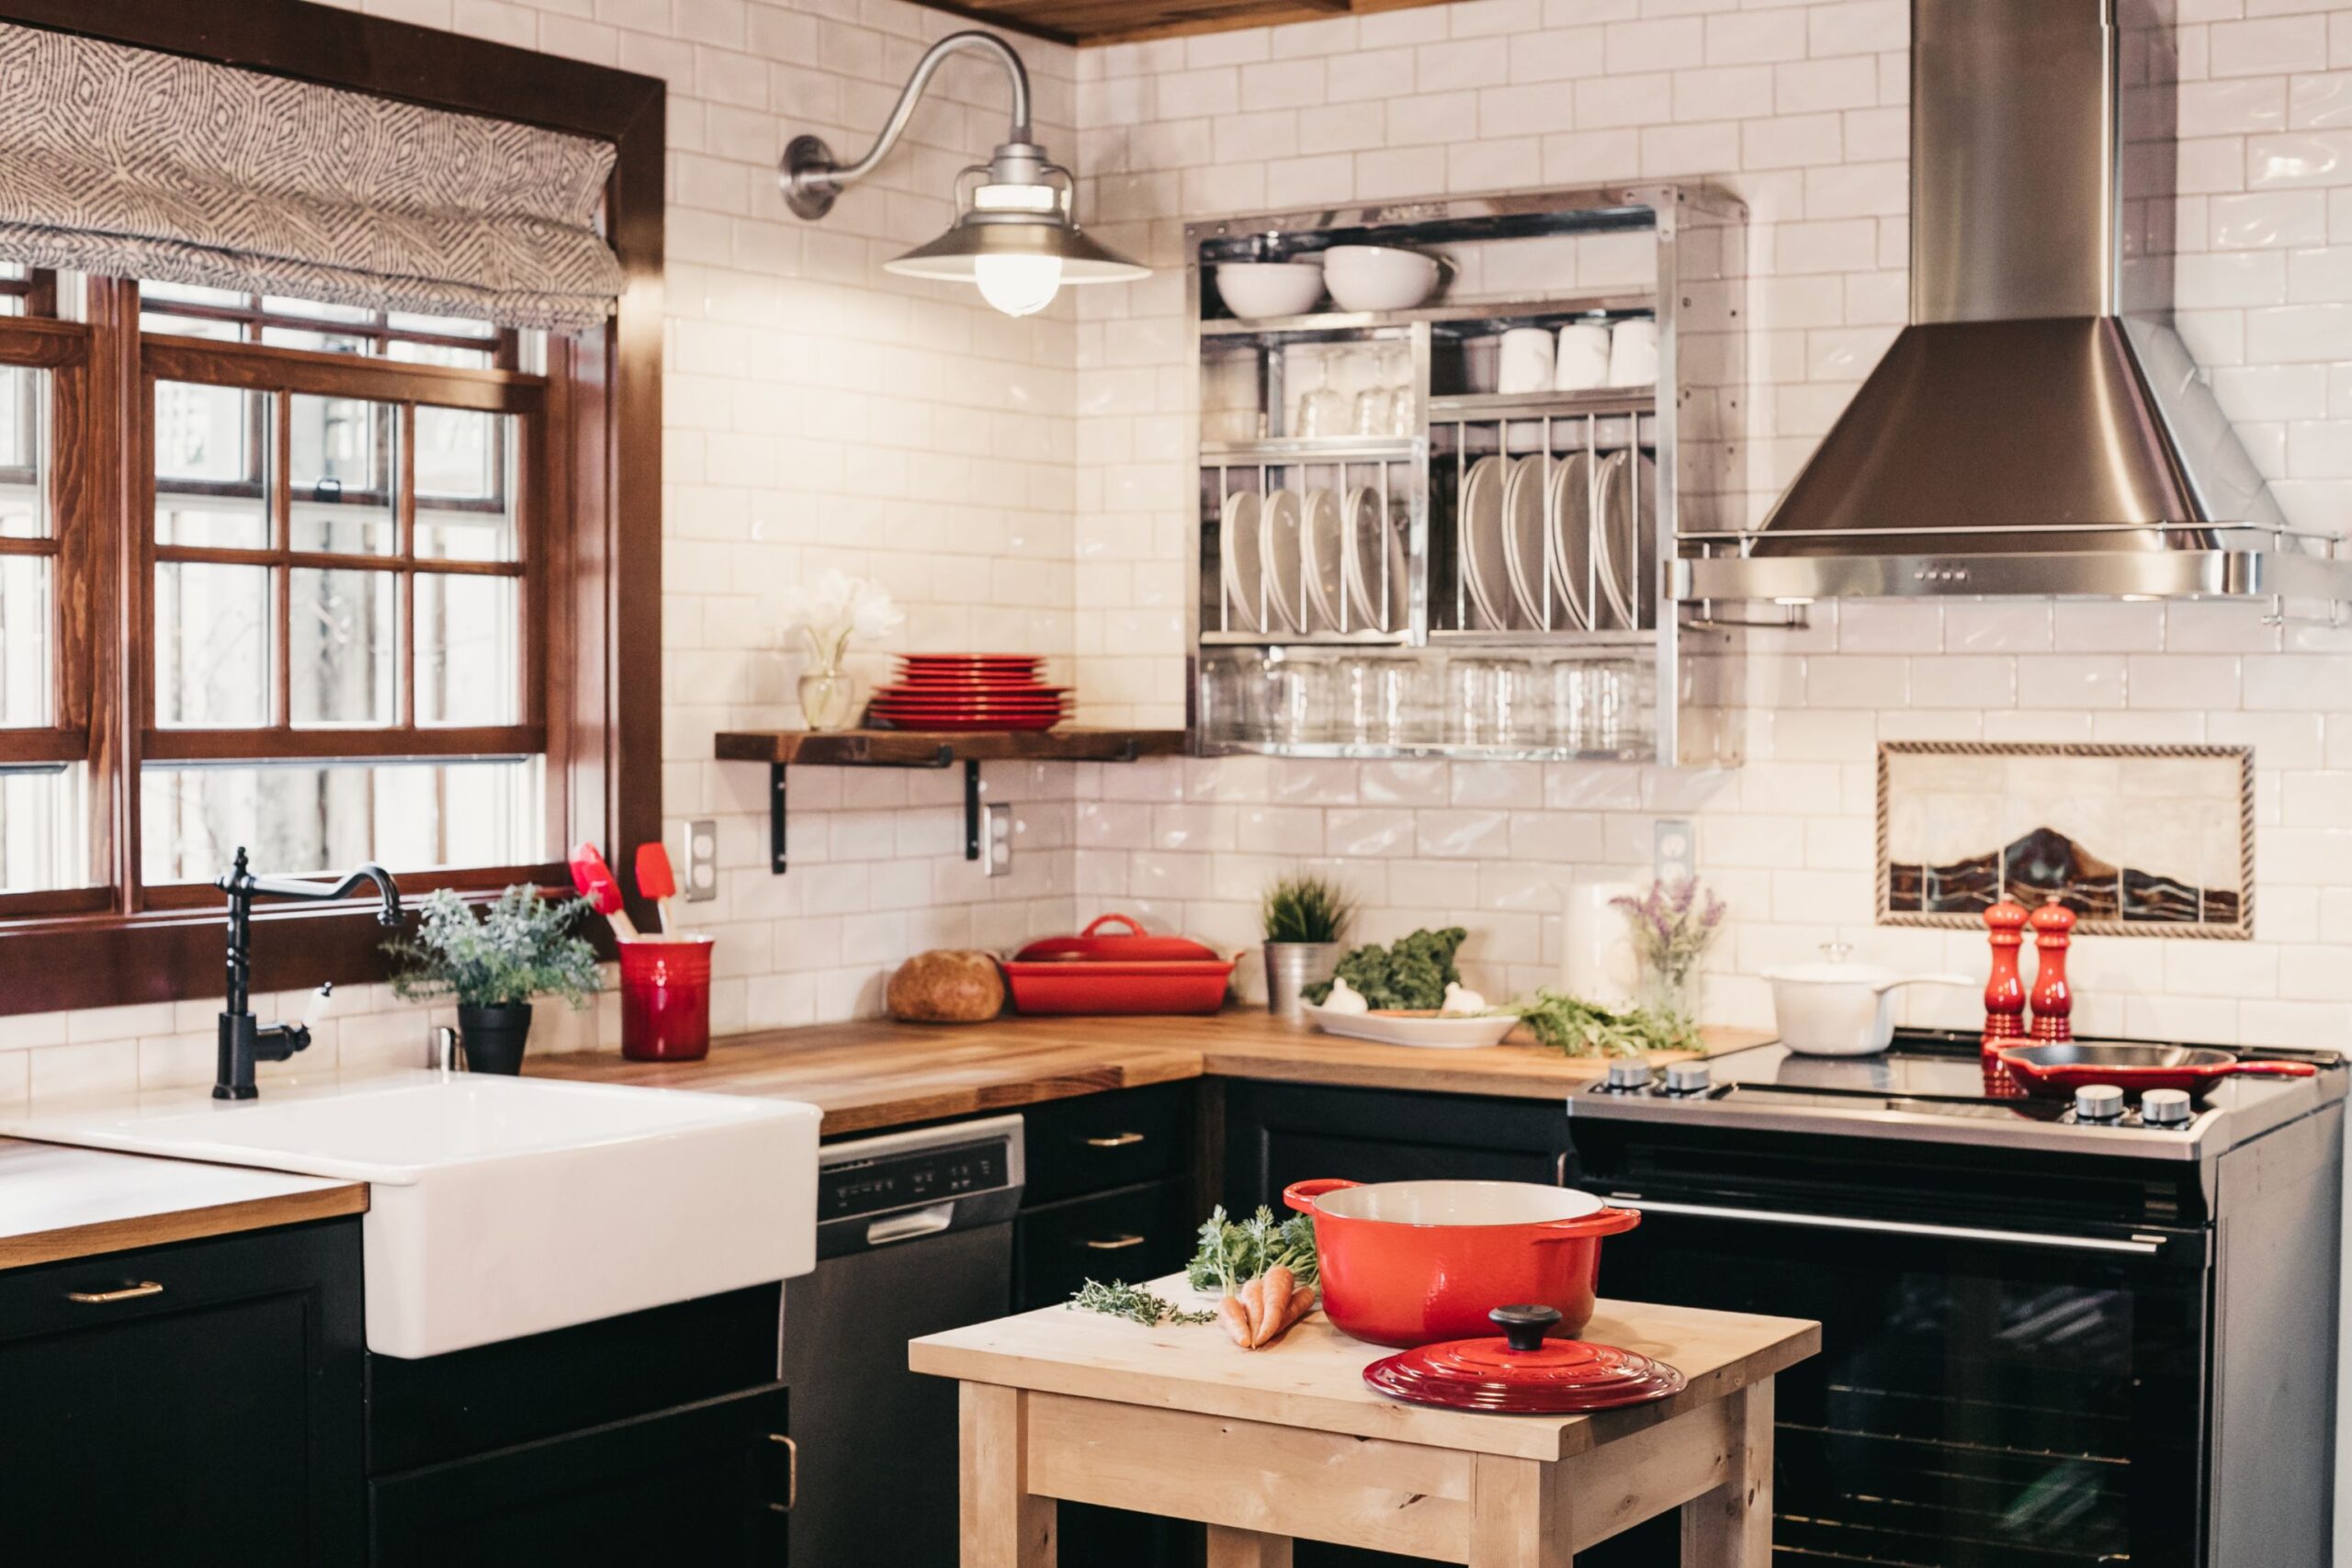 How To Transform Your Kitchen On a Budget